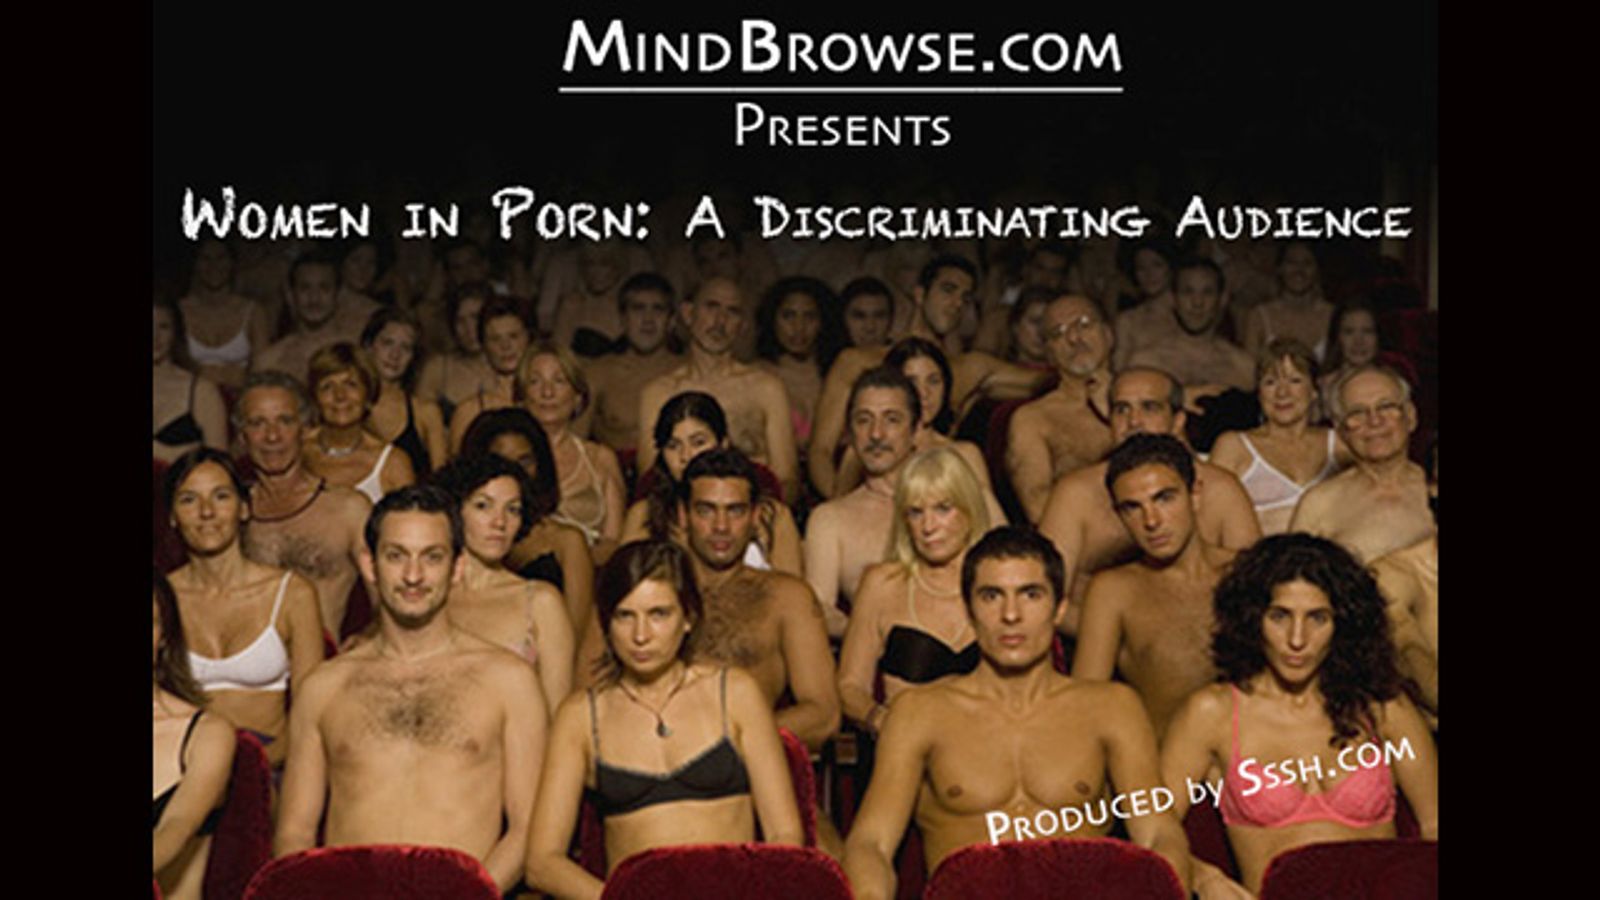 Mindbrowse to Webcast 'Women in Porn: A Discriminating Audience'